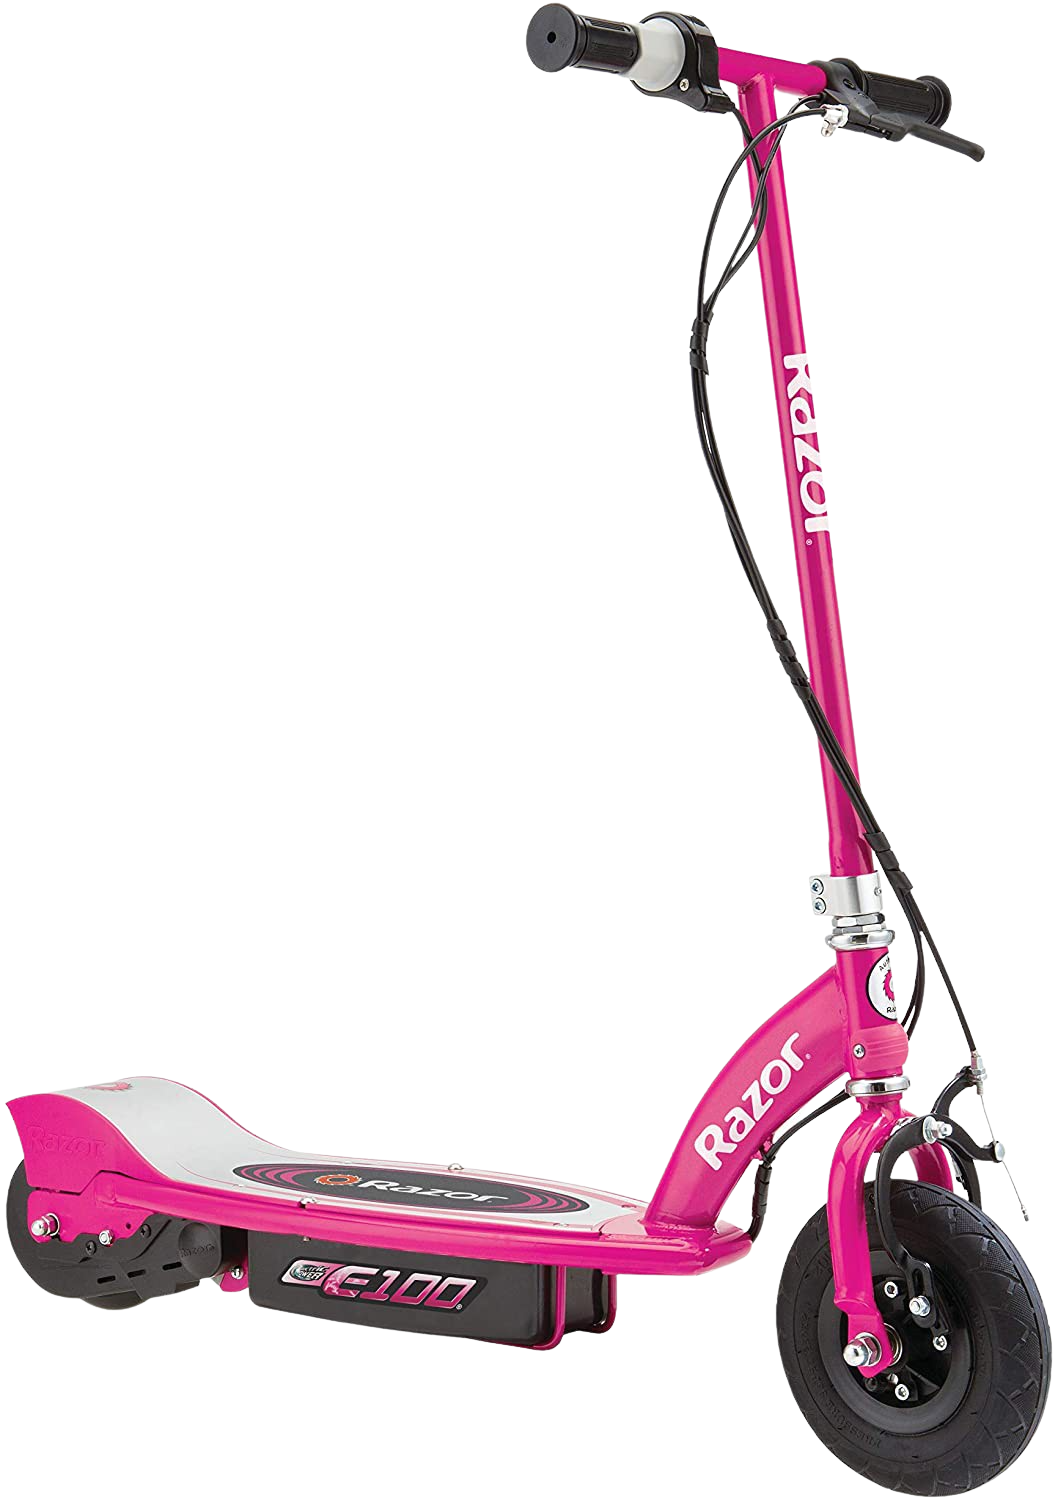 Razor, Razor E100 Sweet Pea Up to 40 Minute Run Time 10 MPH 8" Tires Electric Scooter Pink New